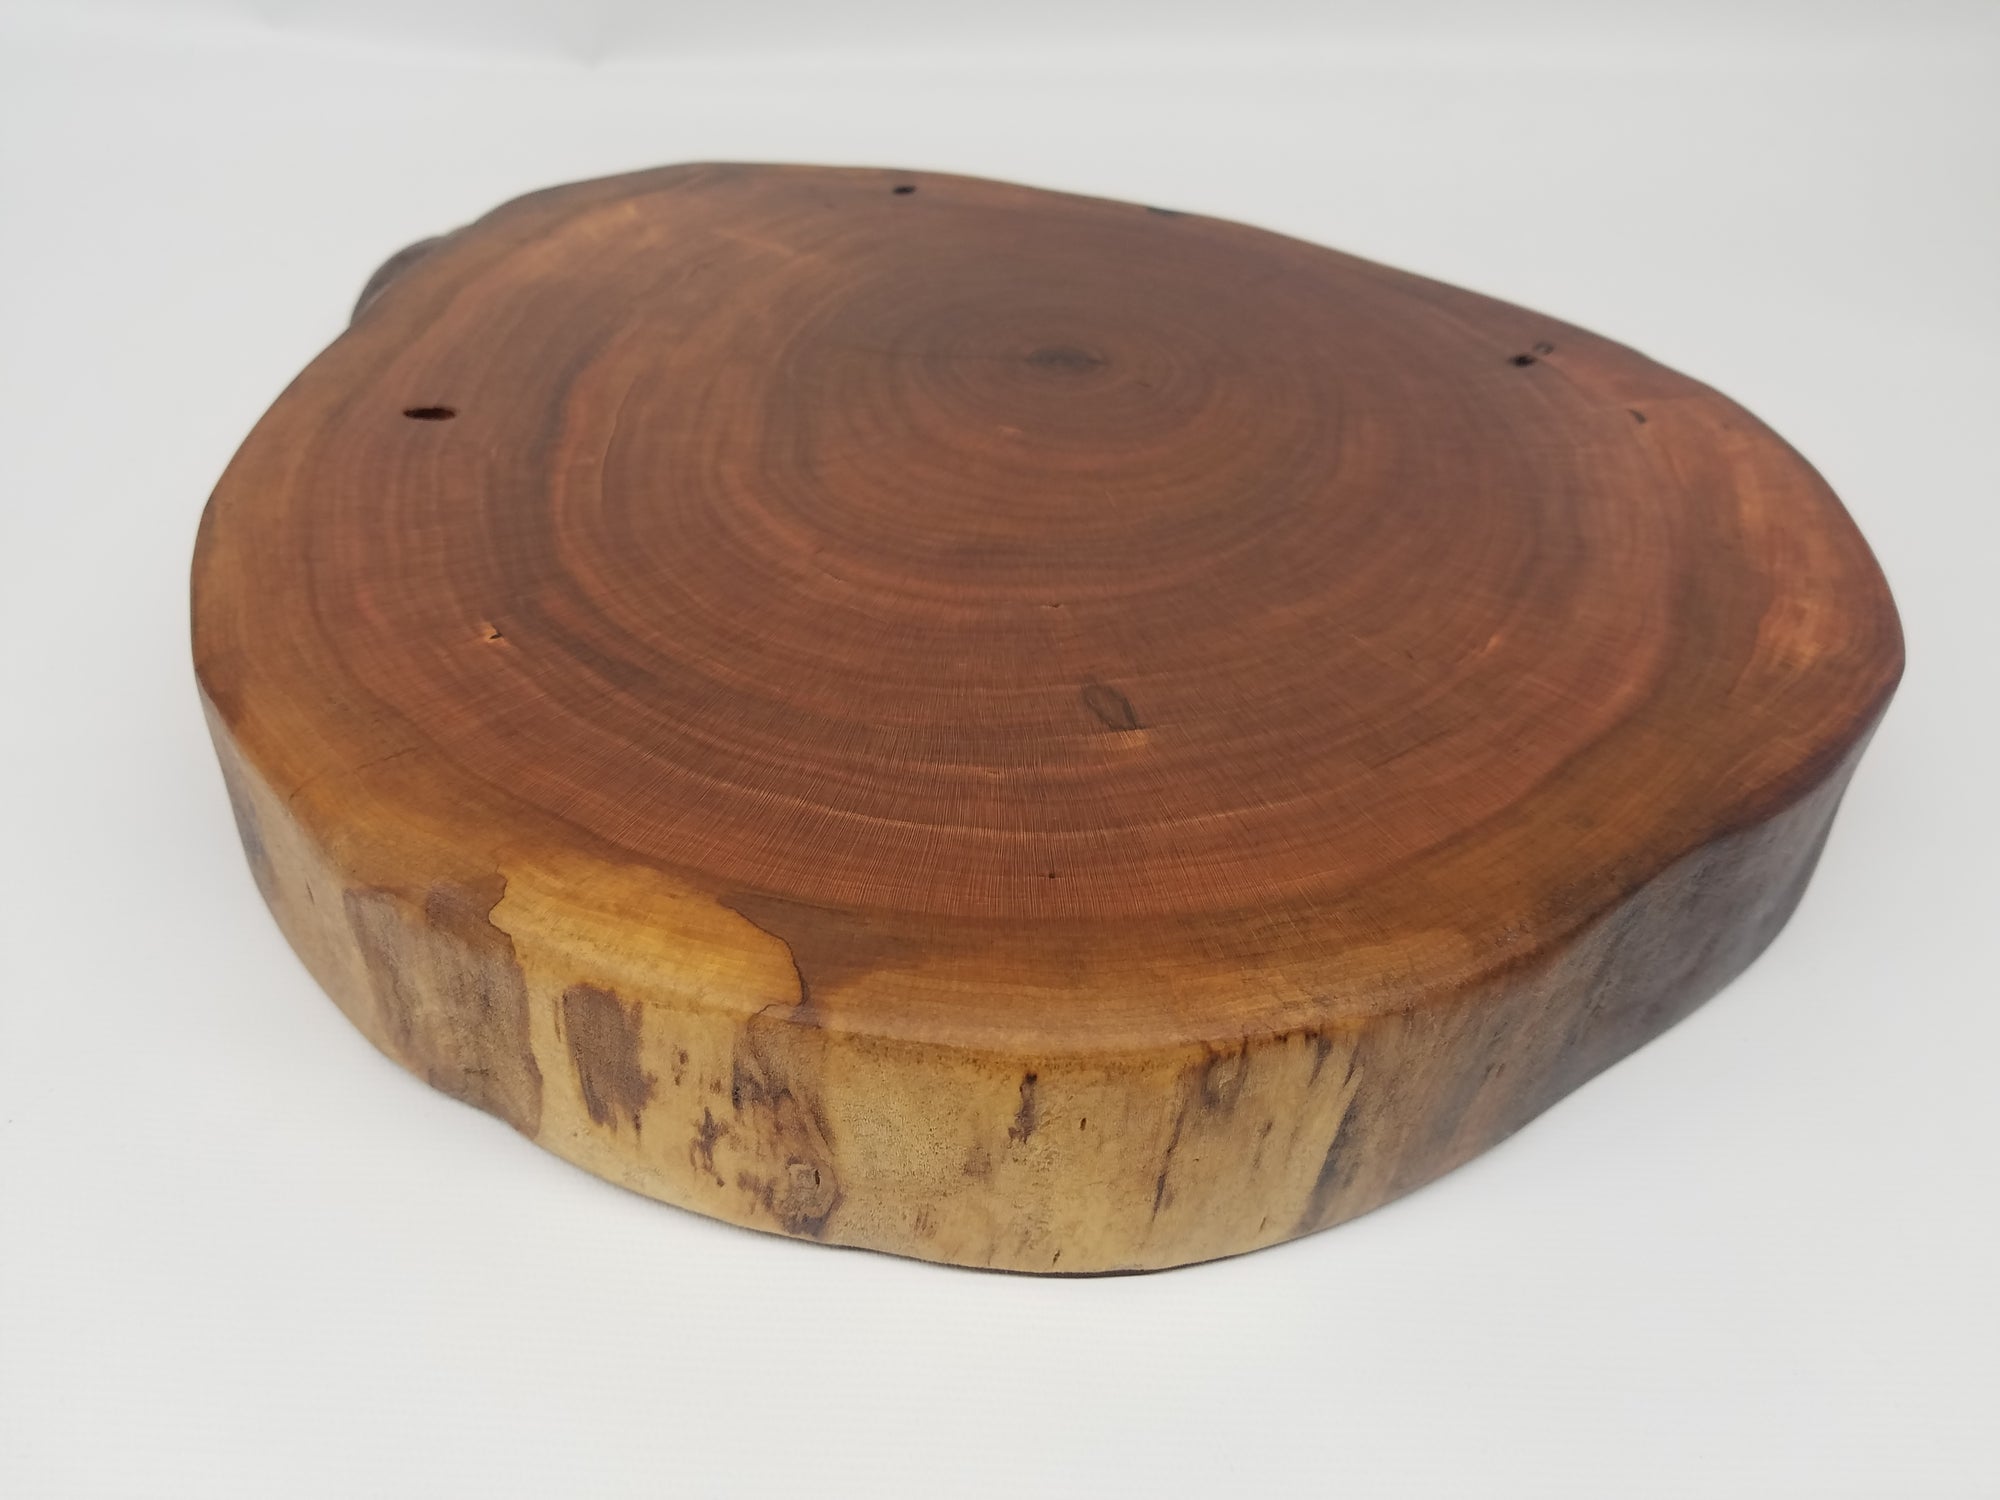 Chopping Block- Charcuterie Board- Cutting Board- Natural Wood- Serving Board- Cherry- Cheese Board- Tapas- Round- Disc-Live Edges- Culinary